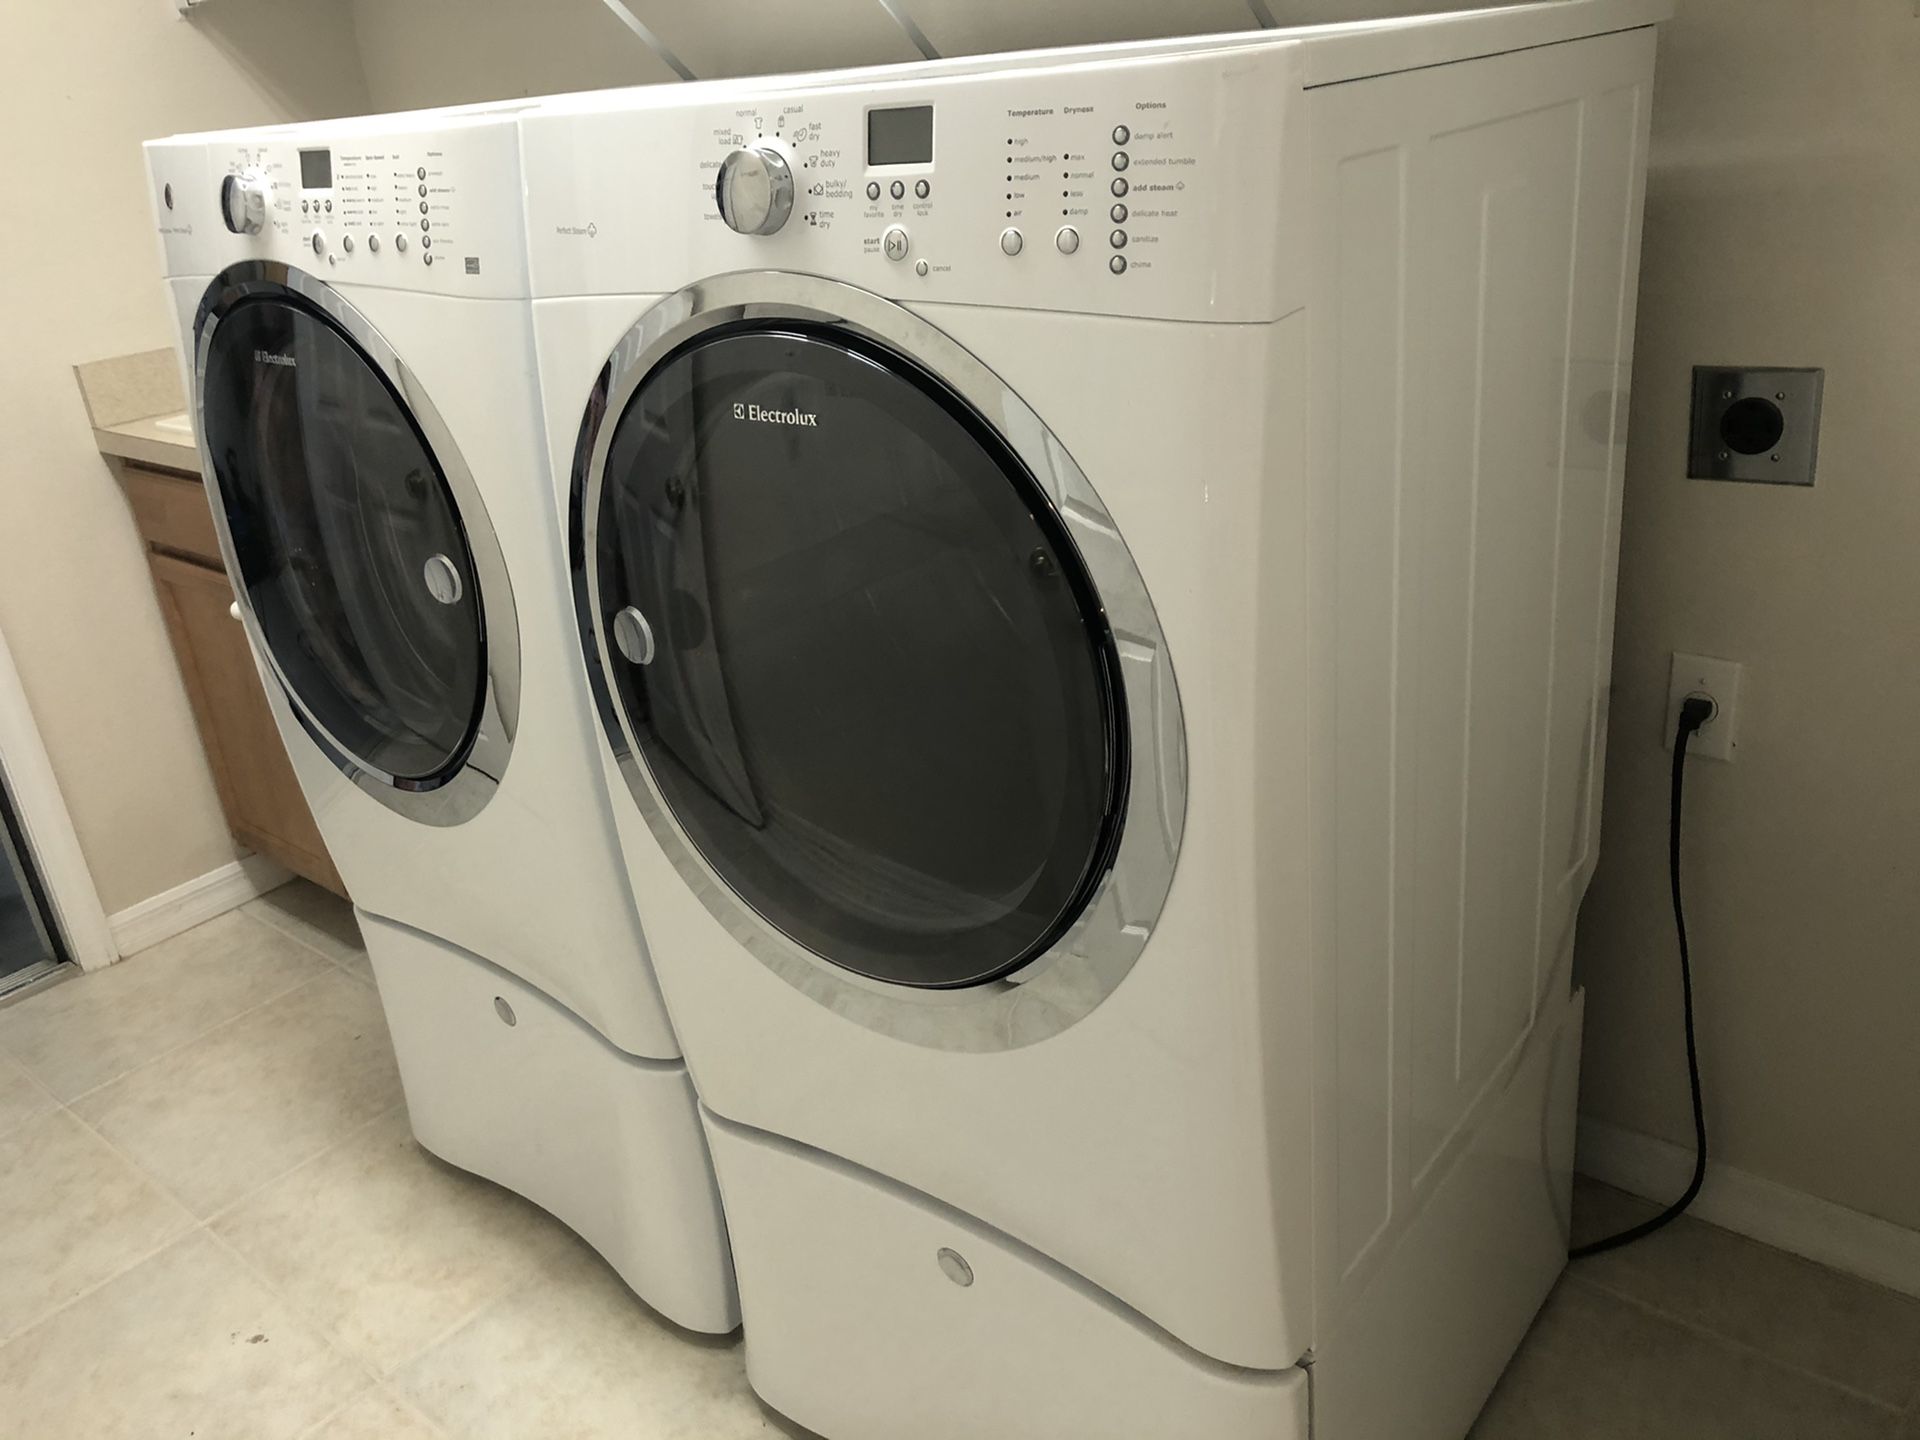 Gas Electrolux washer and dryer.